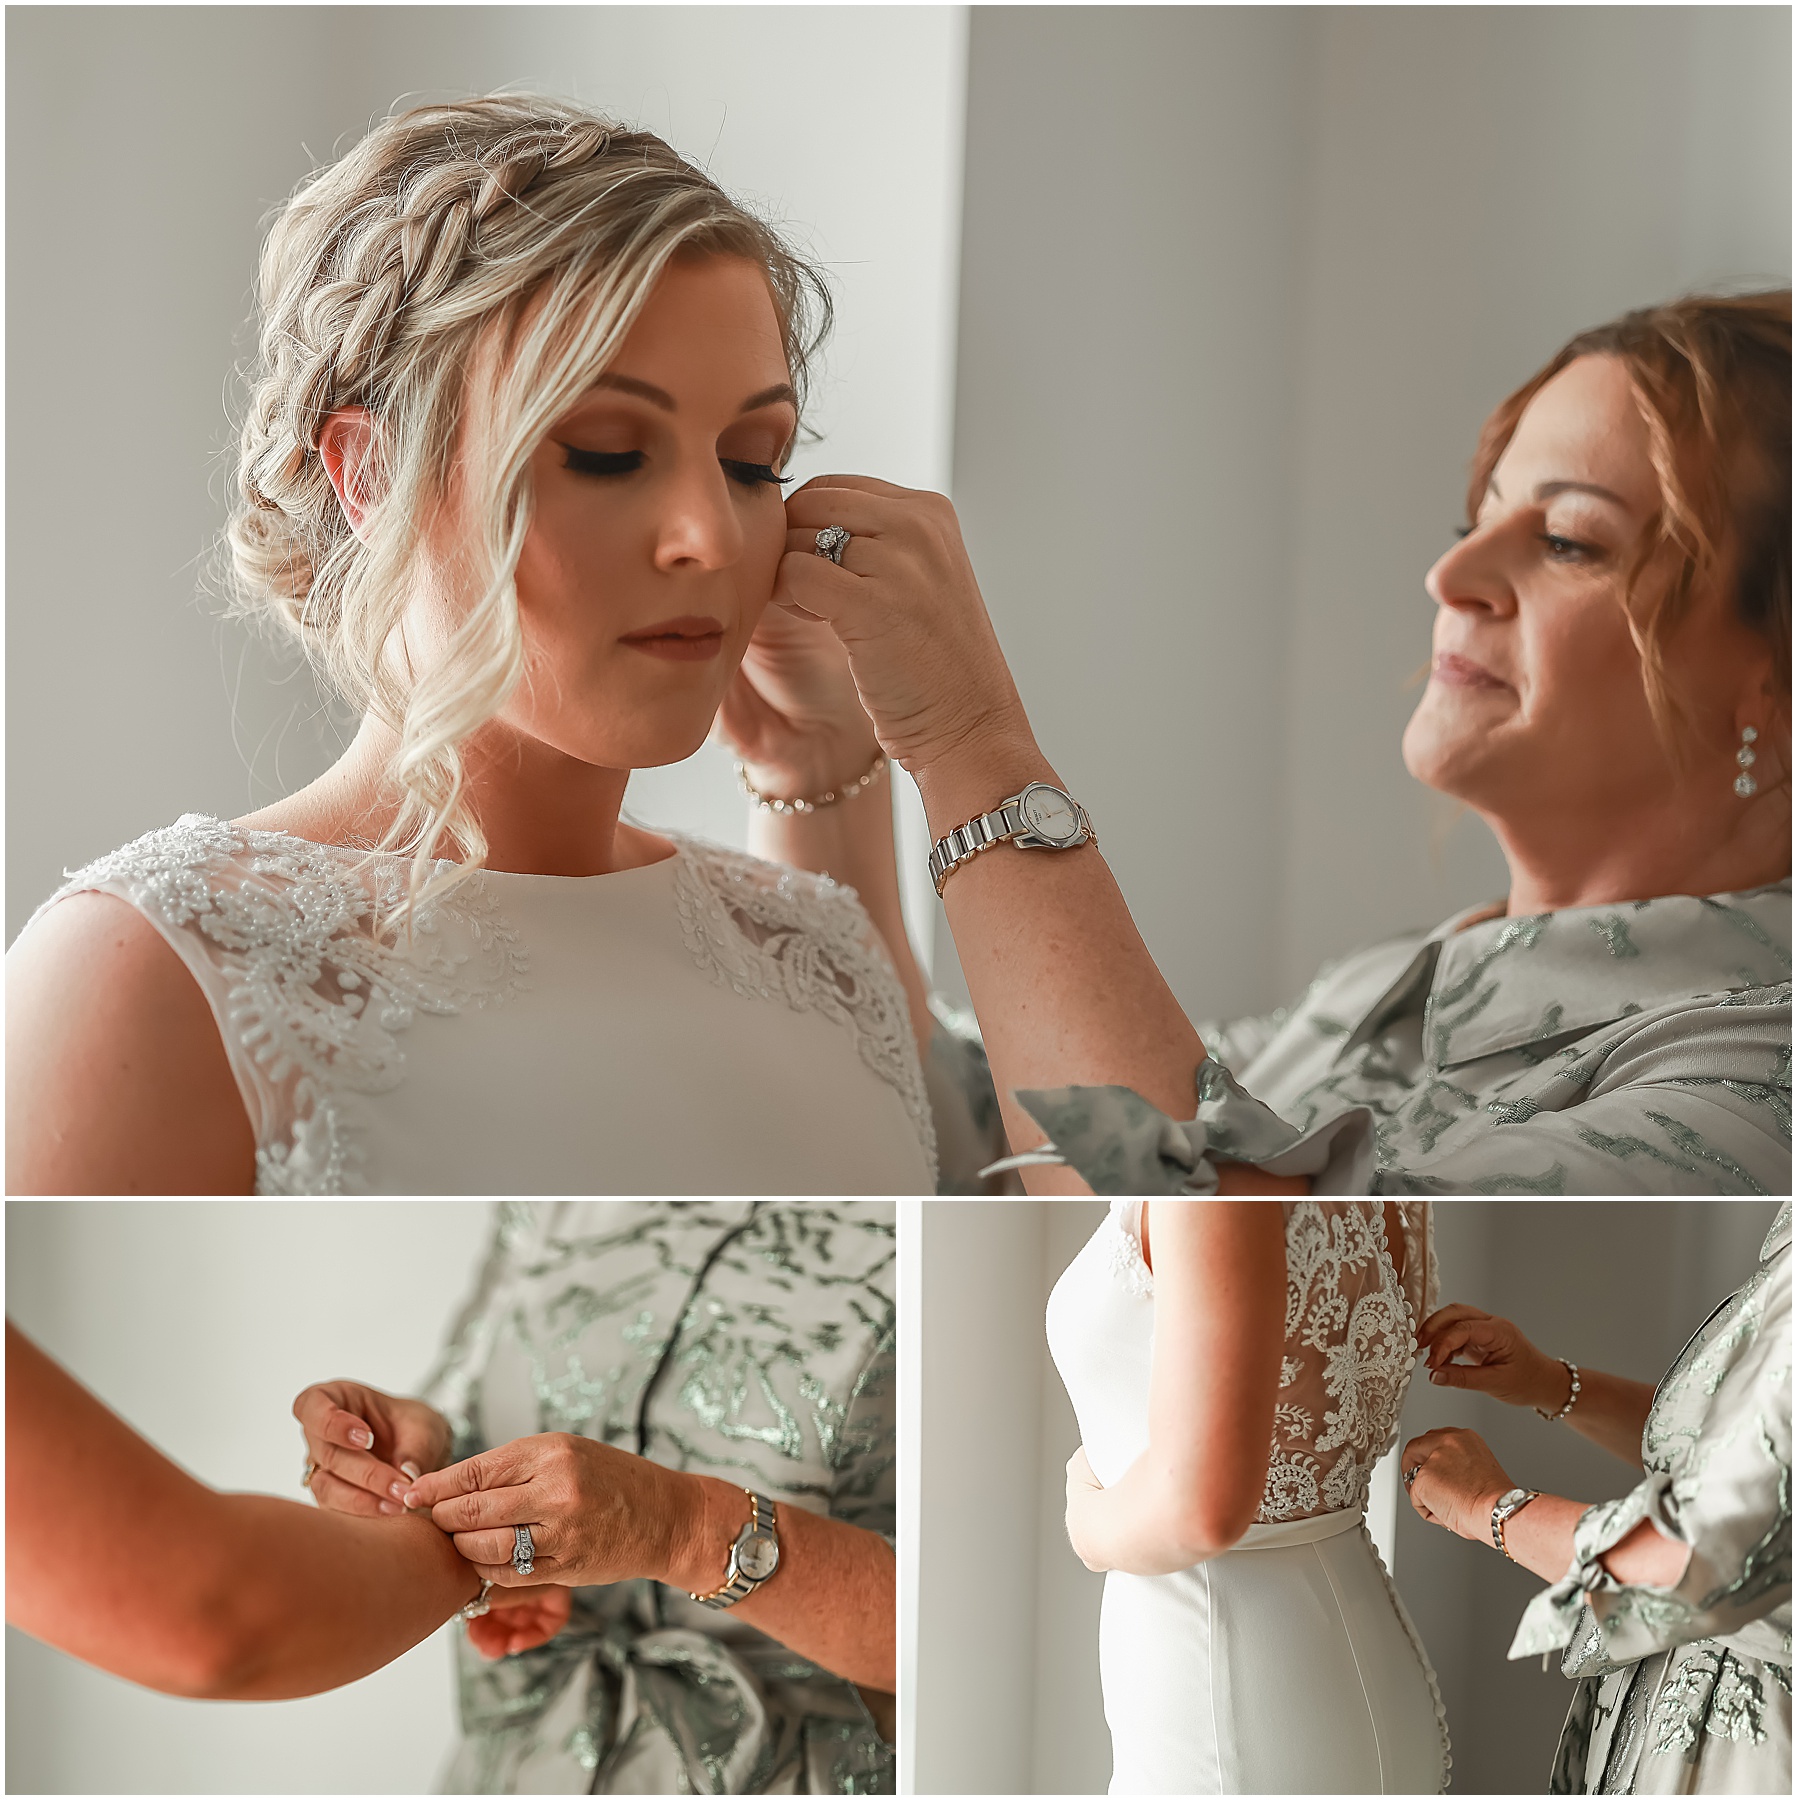 wedding day tips, wedding details, wedding ring, wedding flowers, Colorado wedding photographer, destination wedding photographer, getting ready, wedding jewelry, bride and mother, affordable photographer,